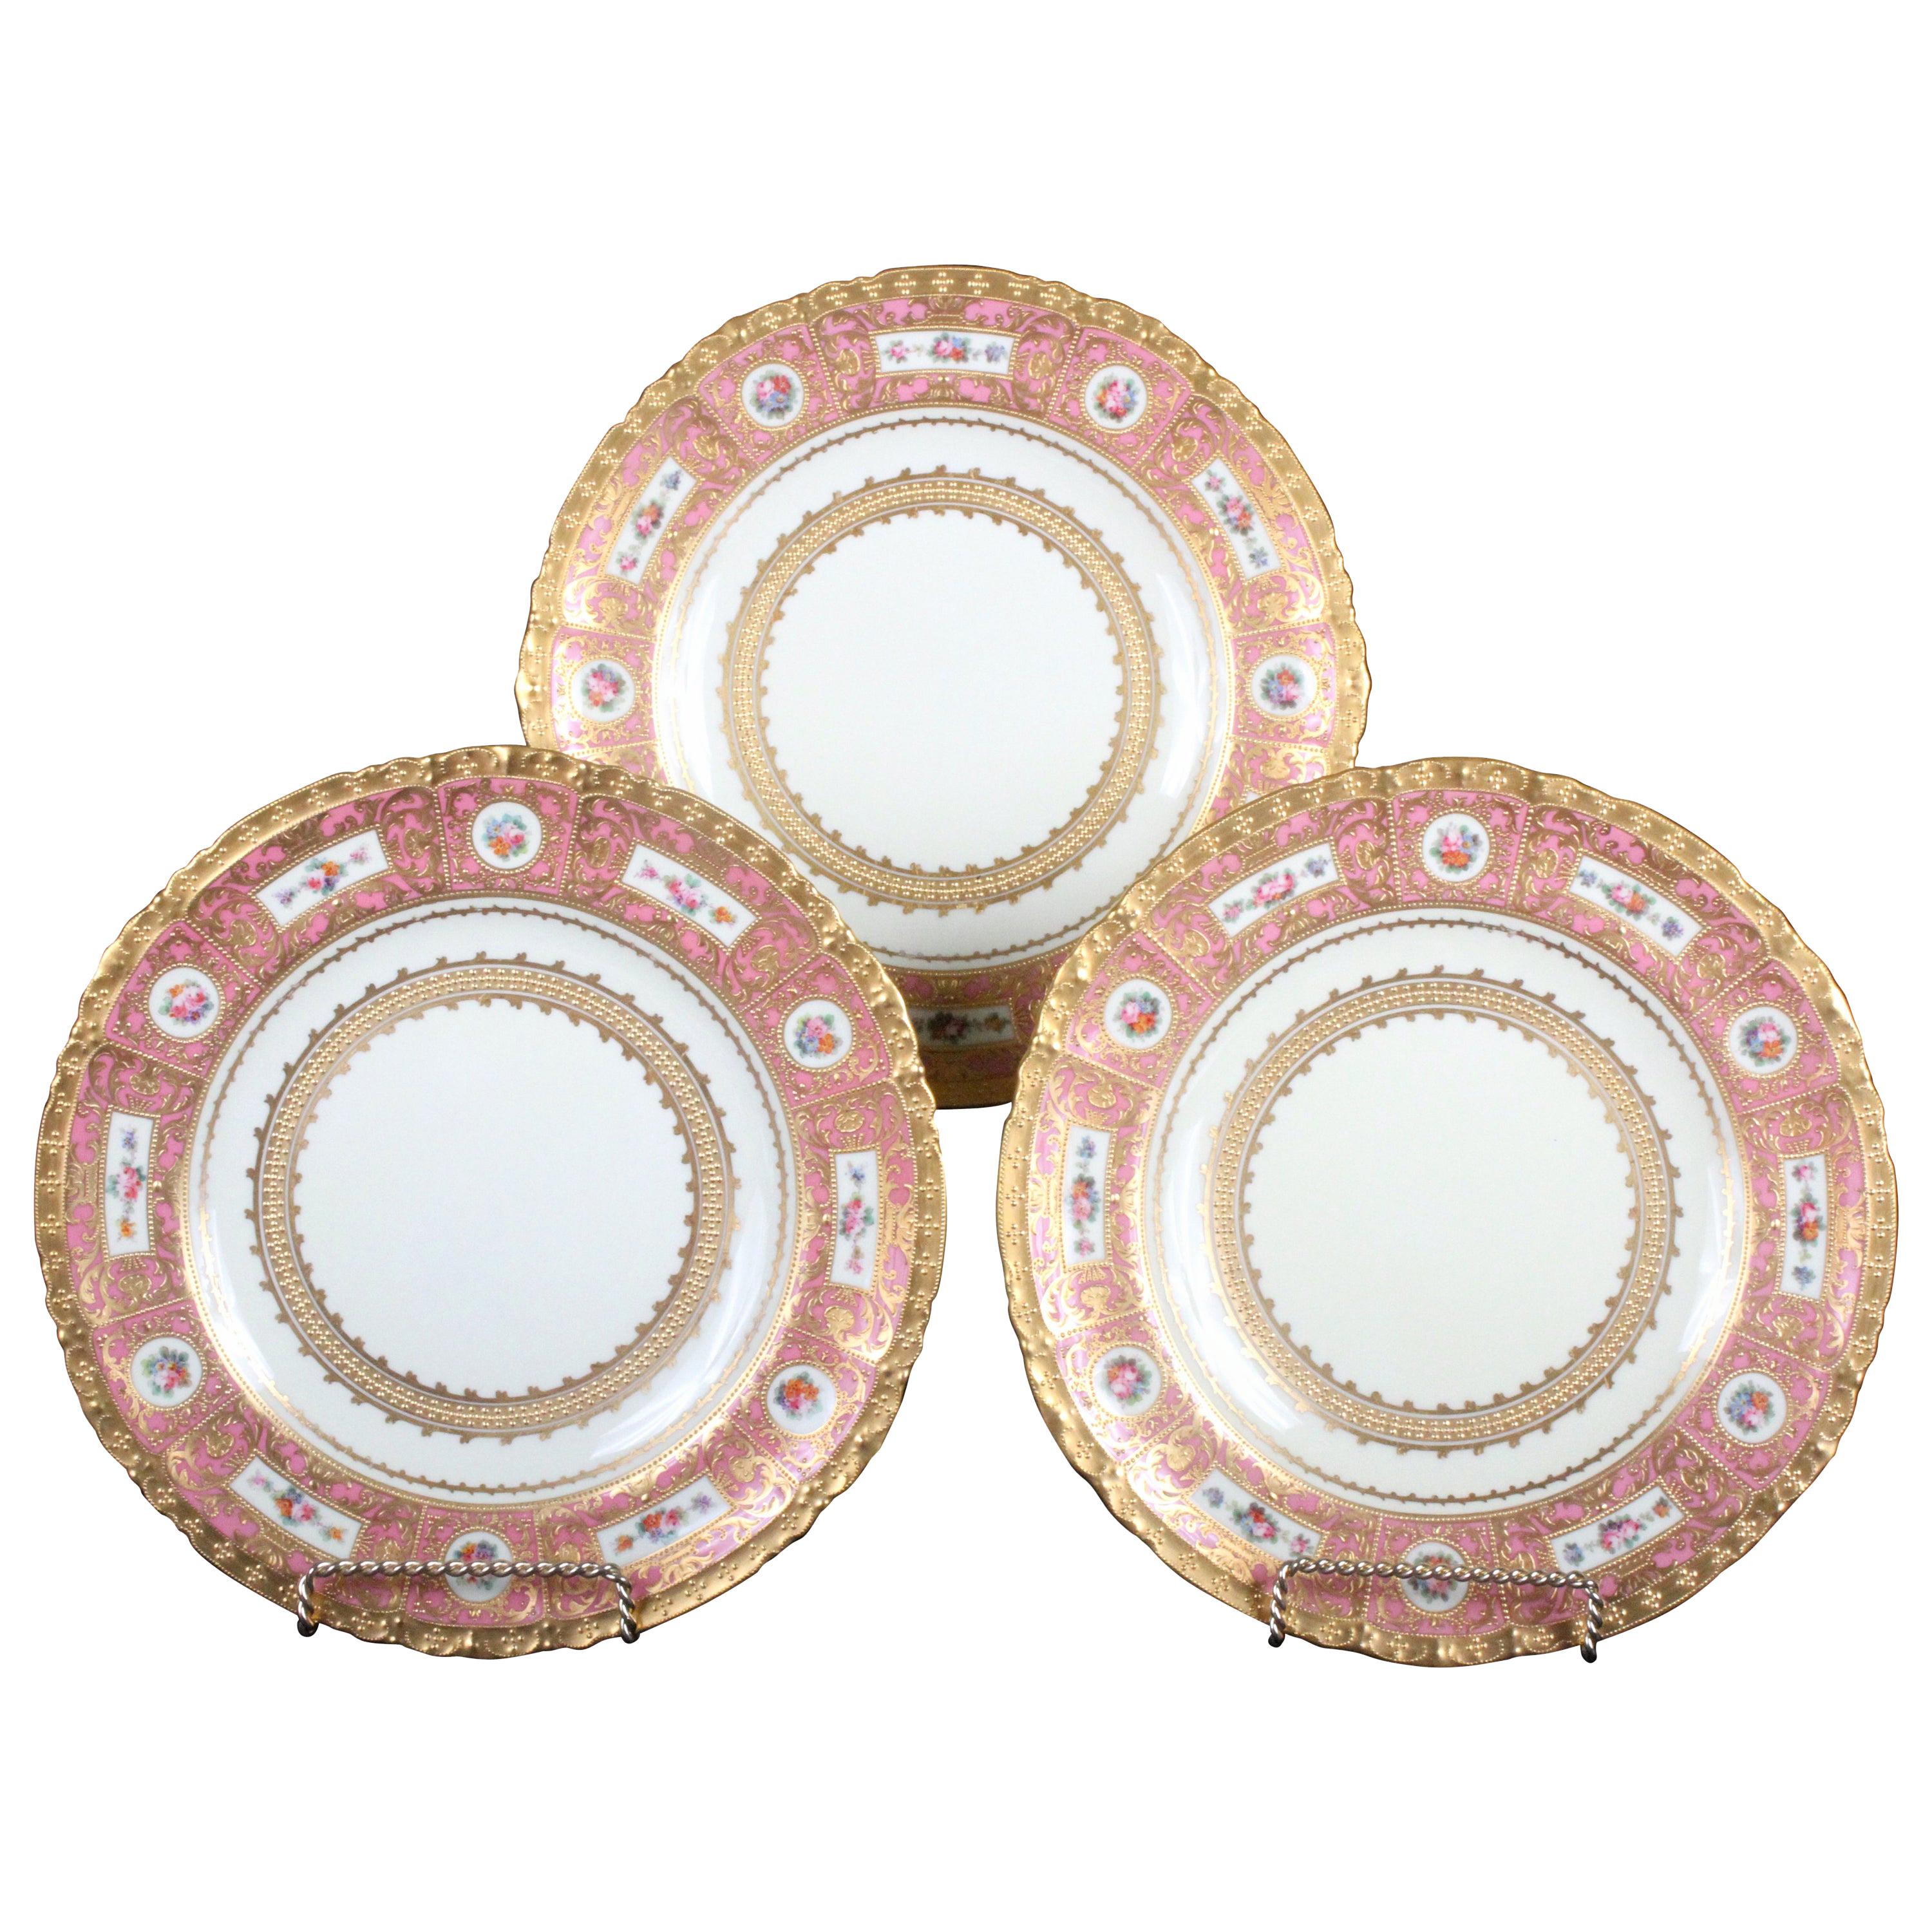 15 Derby for Tiffany Hand Painted and Gilded Pink Service Plates For Sale